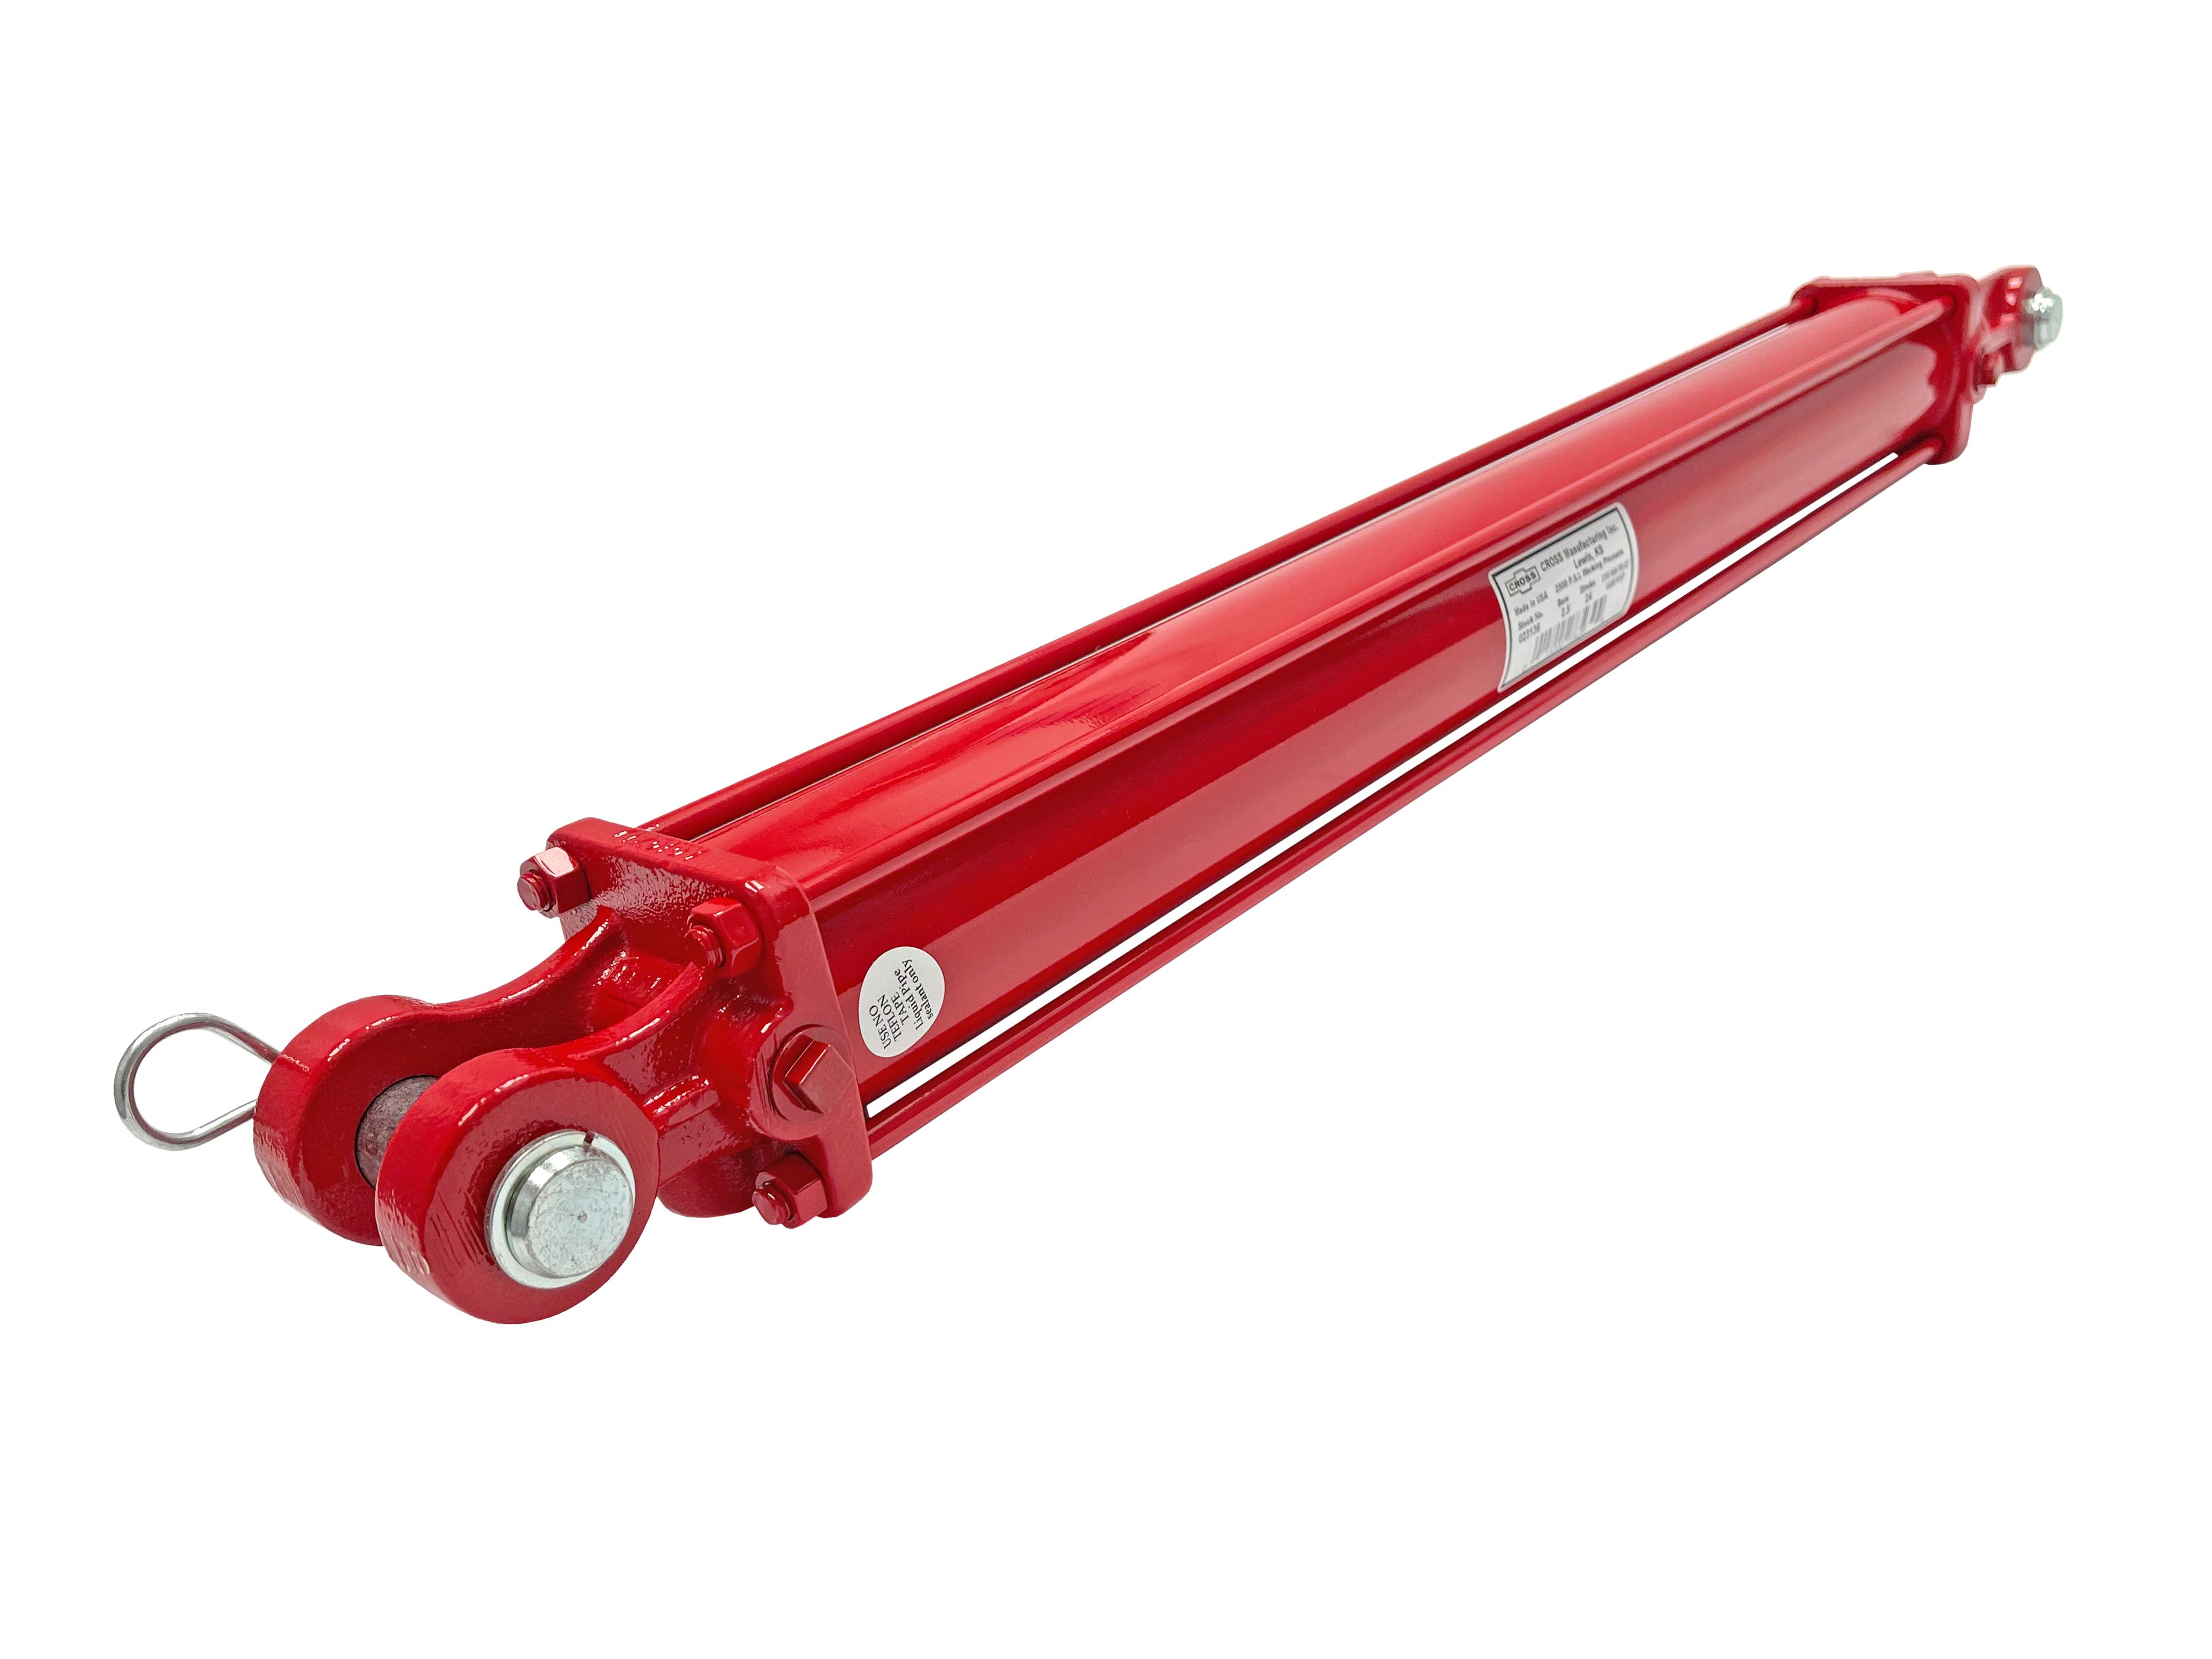 2.5 bore x 26 stroke CROSS hydraulic cylinder, tie rod double acting cylinder DB series | CROSS MANUFACTURING